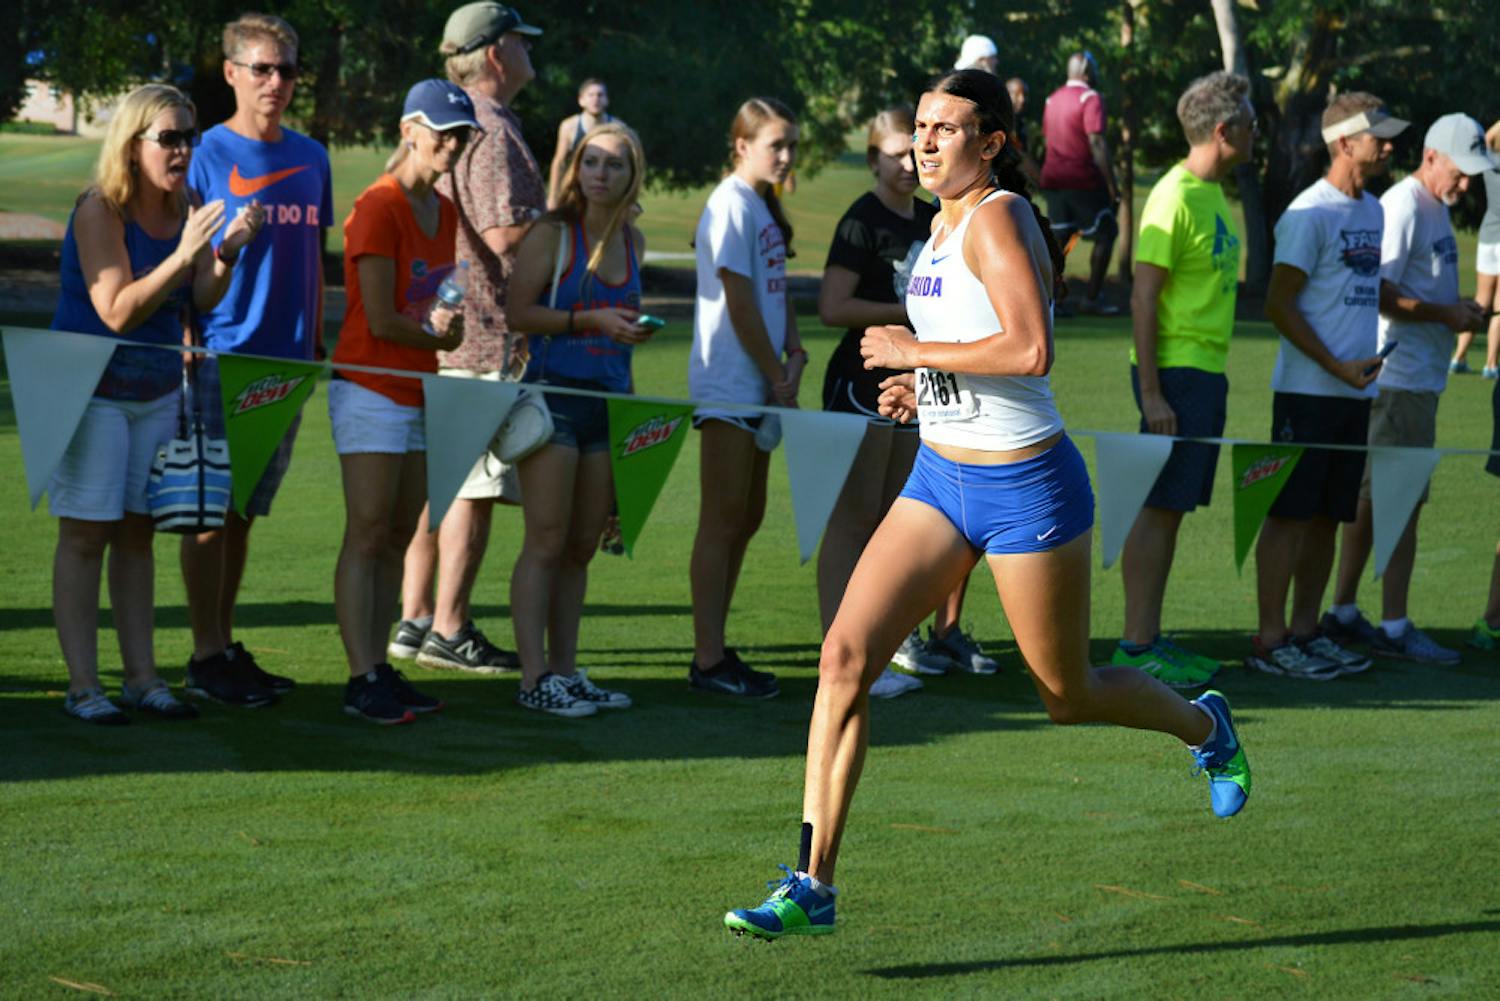 Jessica Pascoe became Florida's first female All-American since 2013 and was named the SEC Women's Runner of the Year last year.